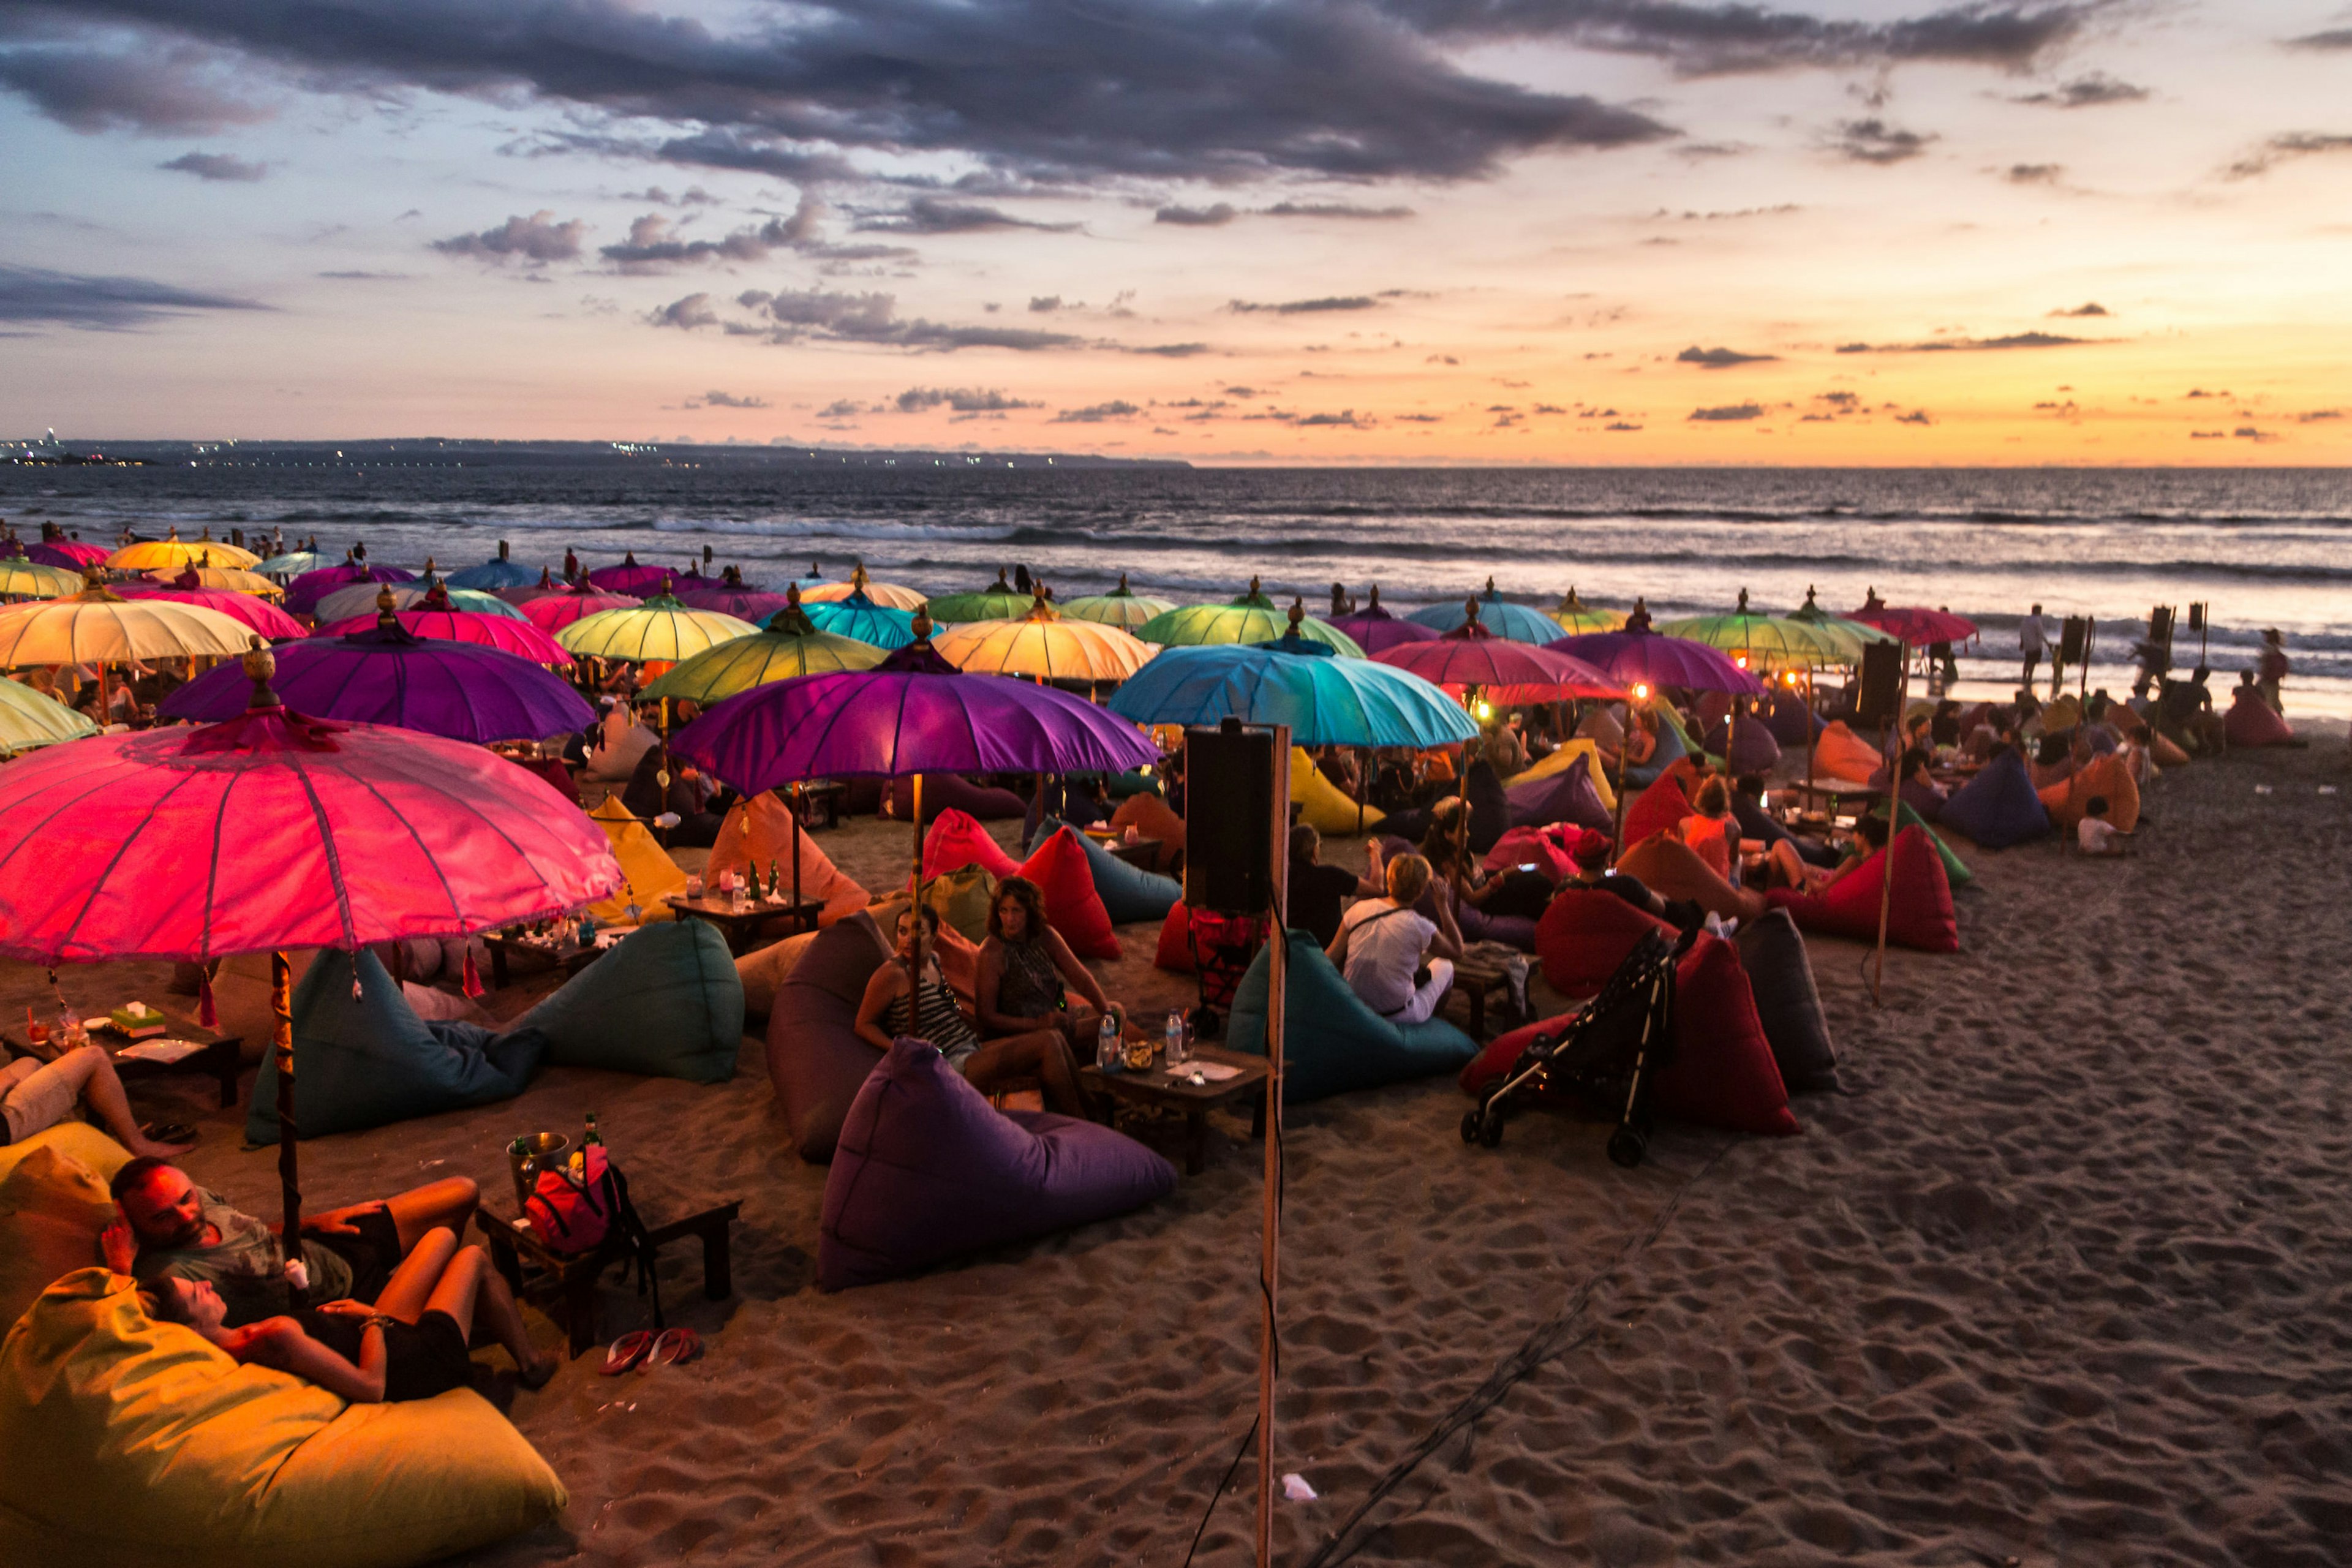 KUTA, INDONESIA - FEBRUARY 19, 2016: A large crowd of tourists enjoy the sunset at a bar on Kuta beach in Seminyak, Bali. The island is famous for its nightlife.